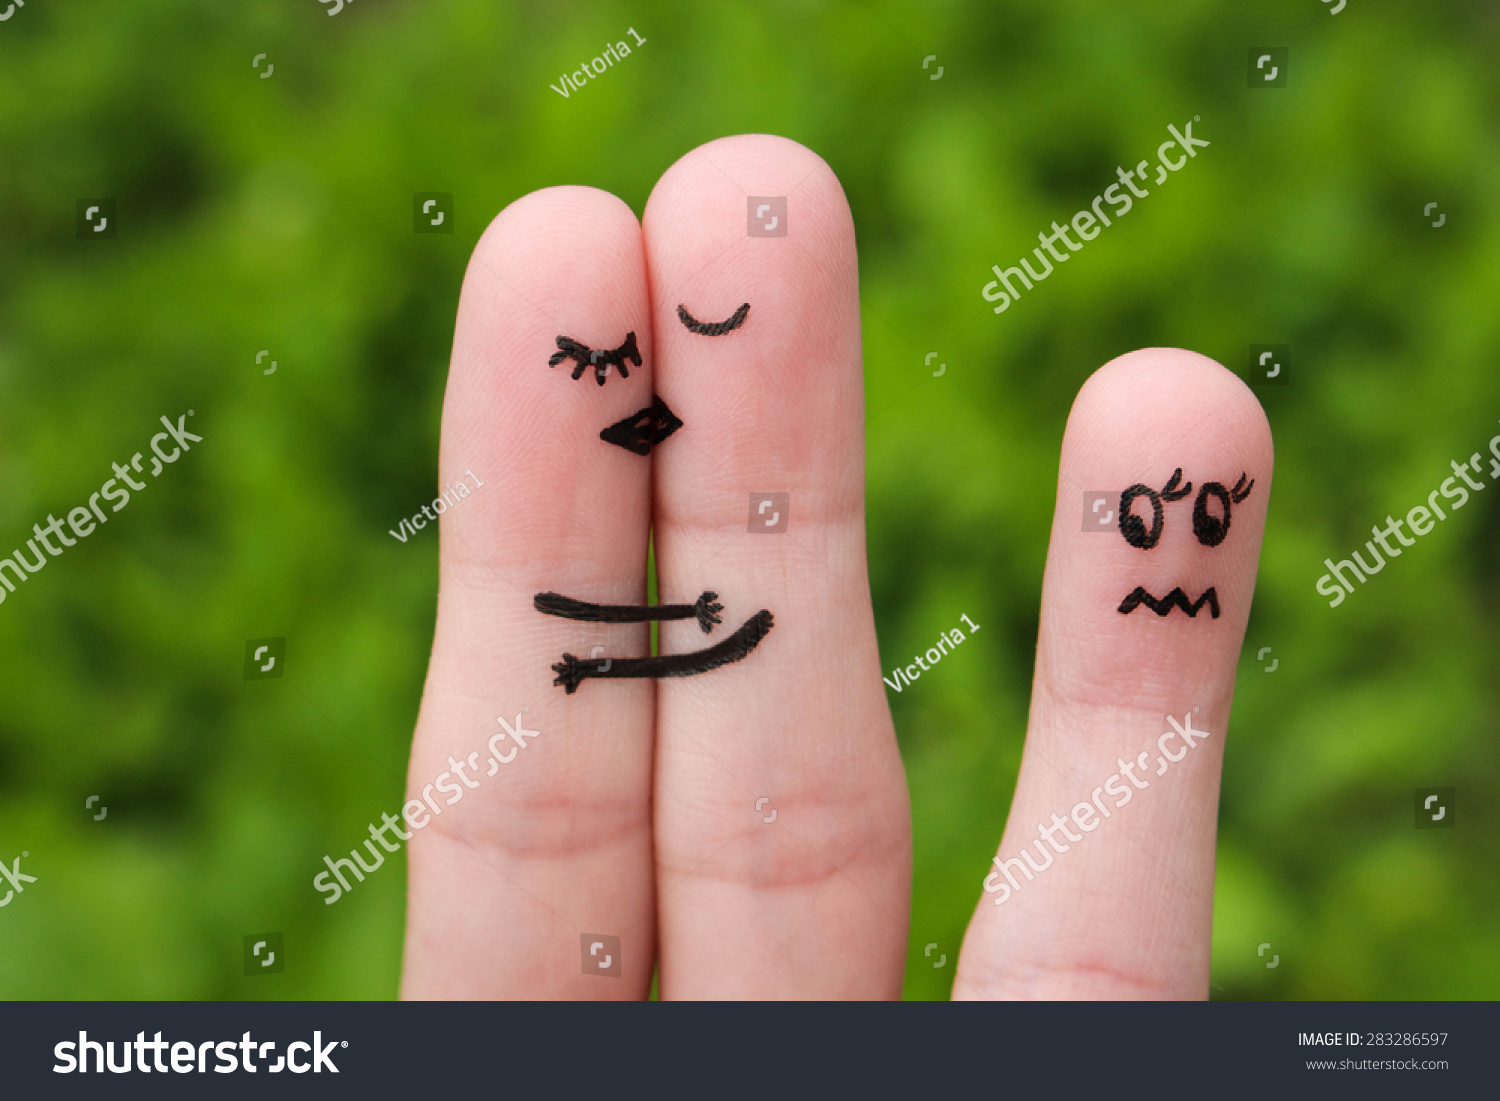 Finger art of Happy coupl kissing and hugging. girl is jealous and angry. #283286597